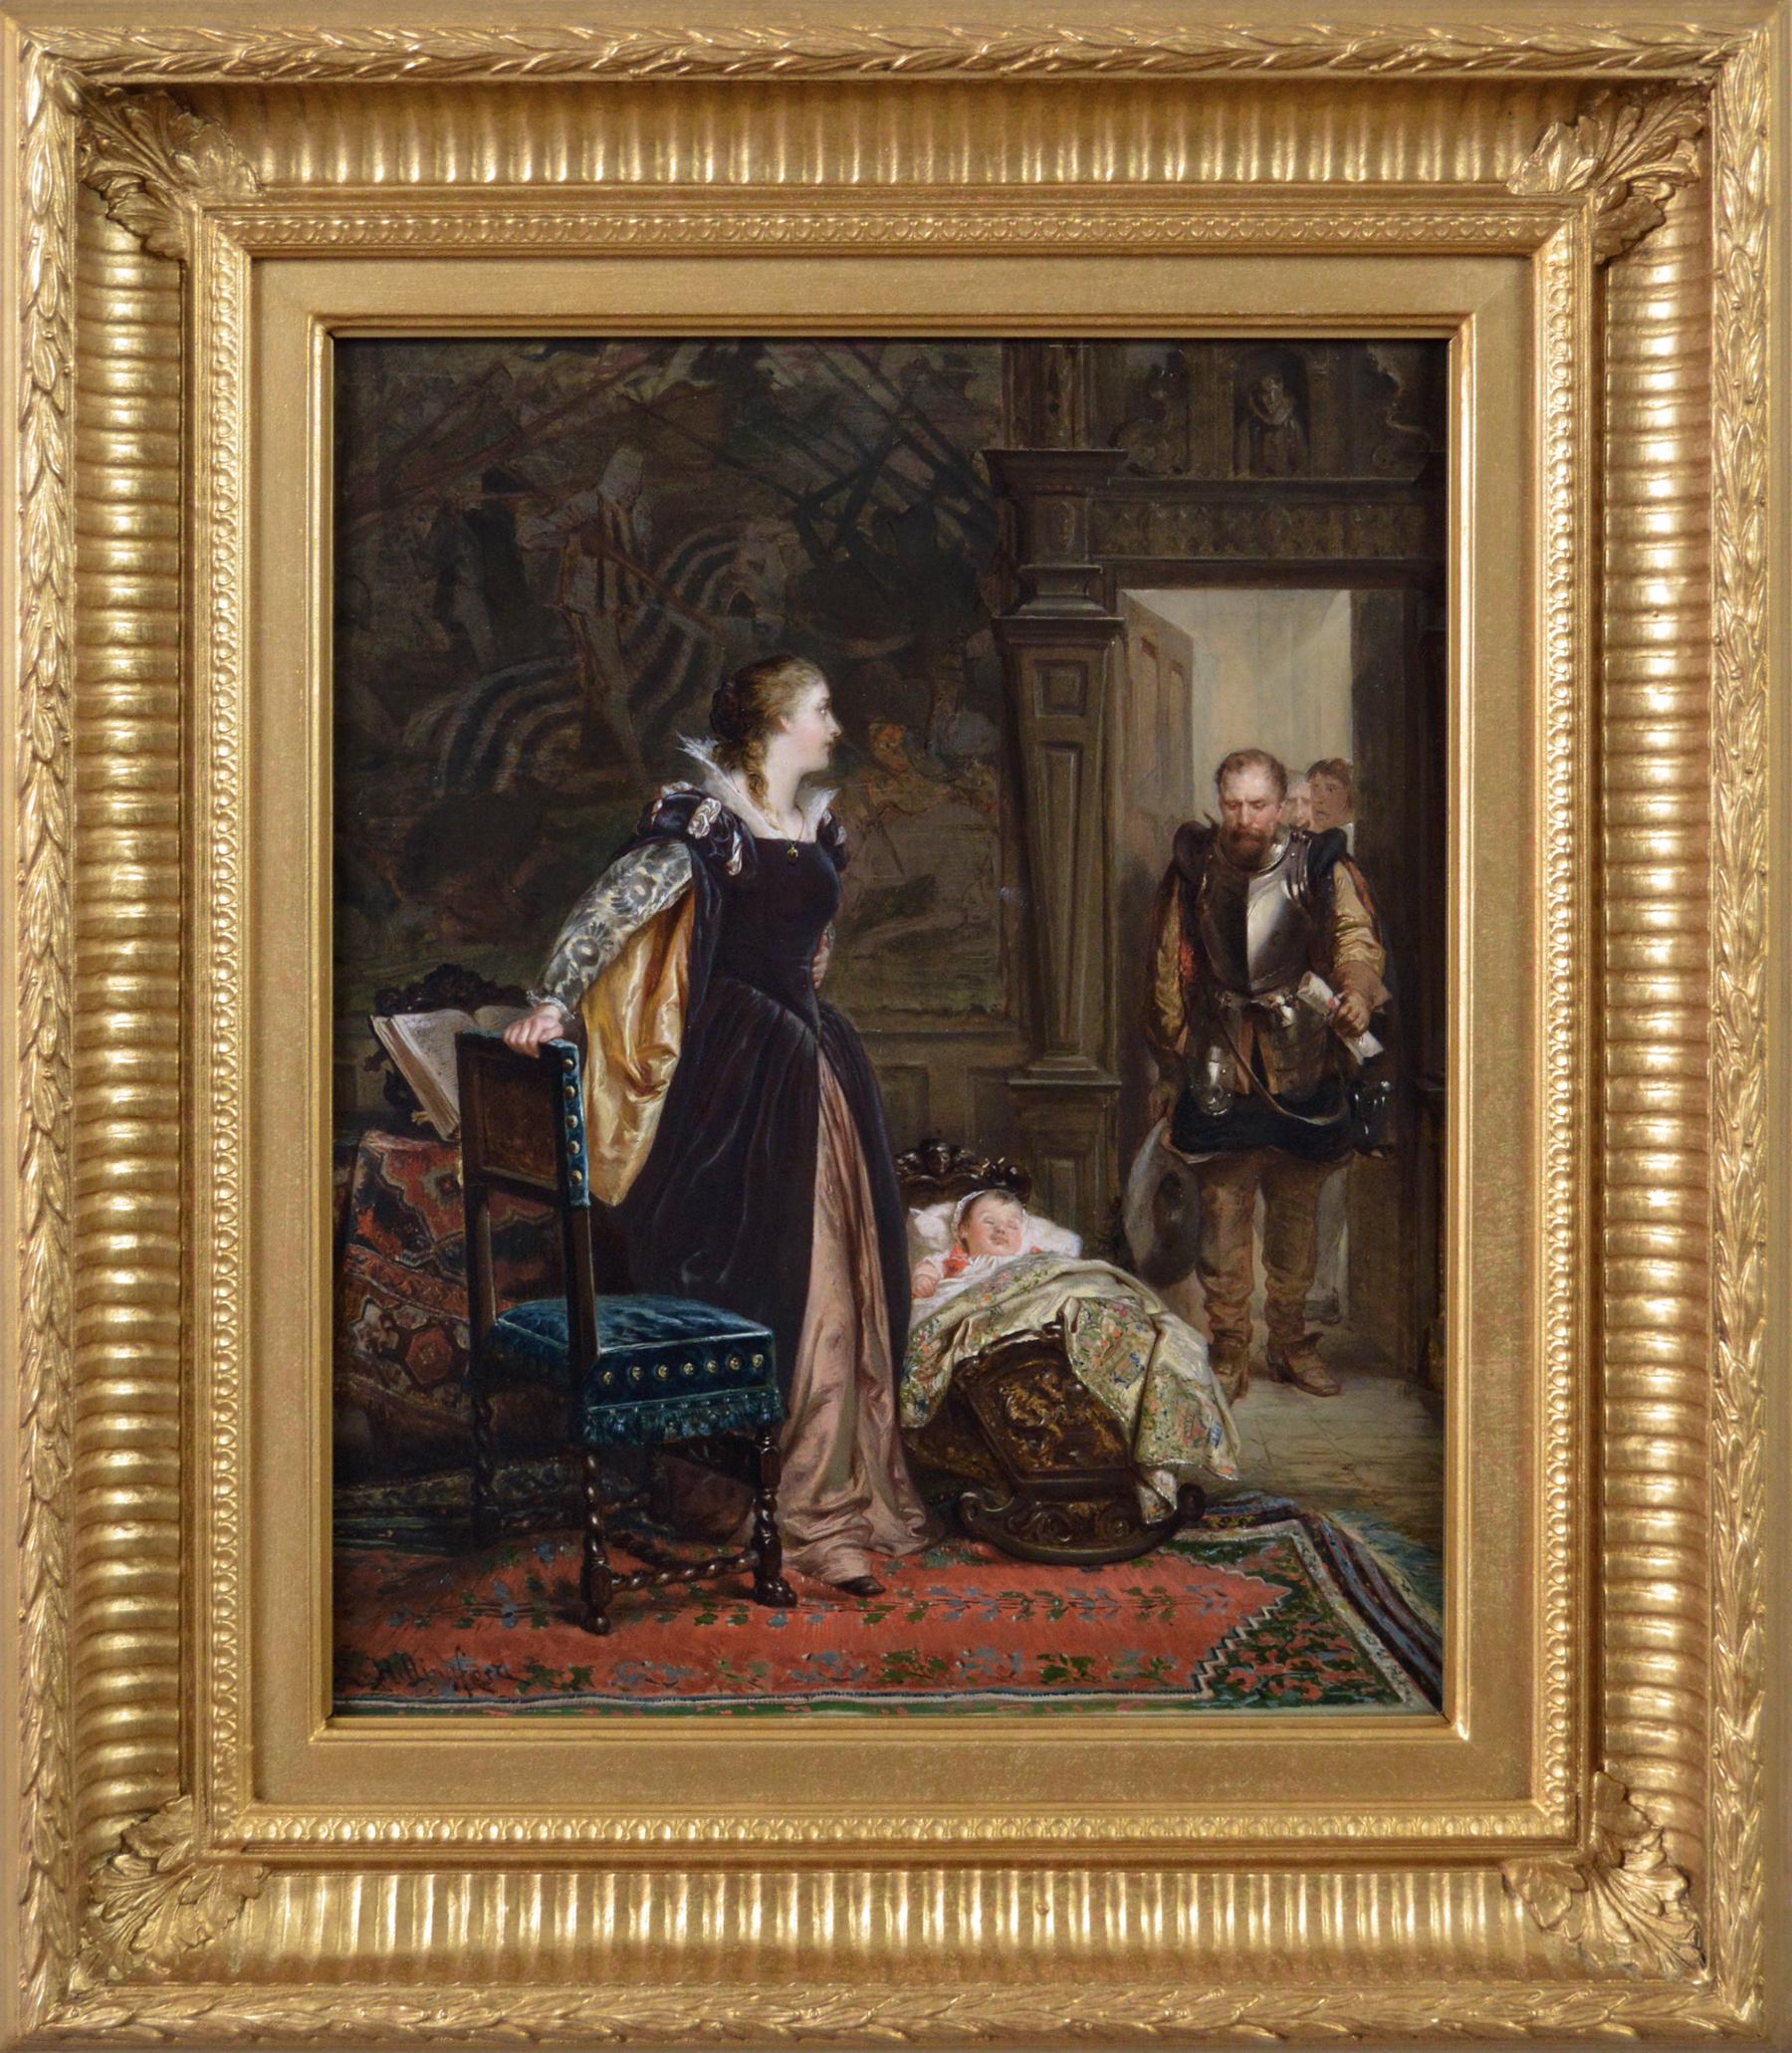 19th Century historical genre oil painting of Mary Queen of Scots & James I